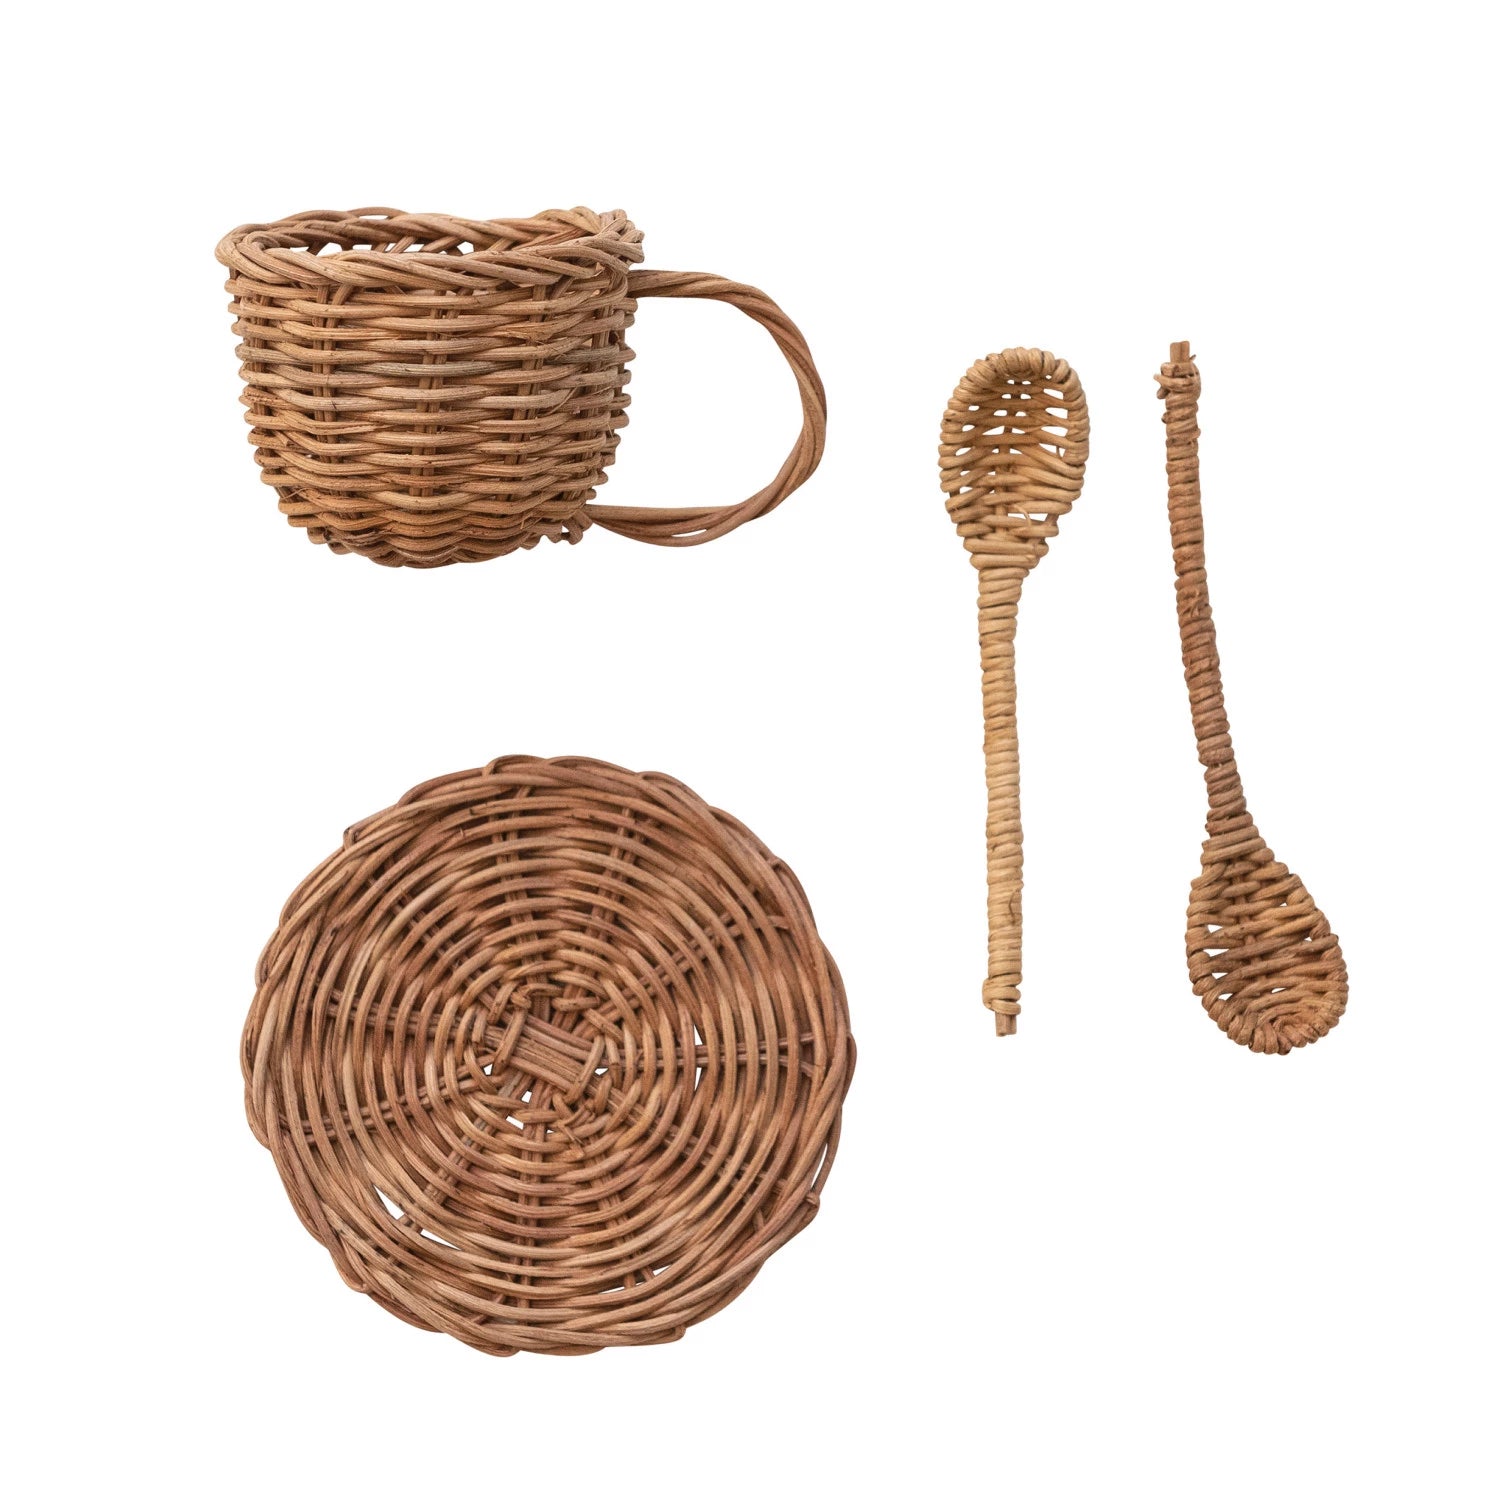 Woven Rattan Toy Tea Set, Set of 7 in Bag (1 Pot, 2 Cups, 2 Spoons & 2 Saucers)